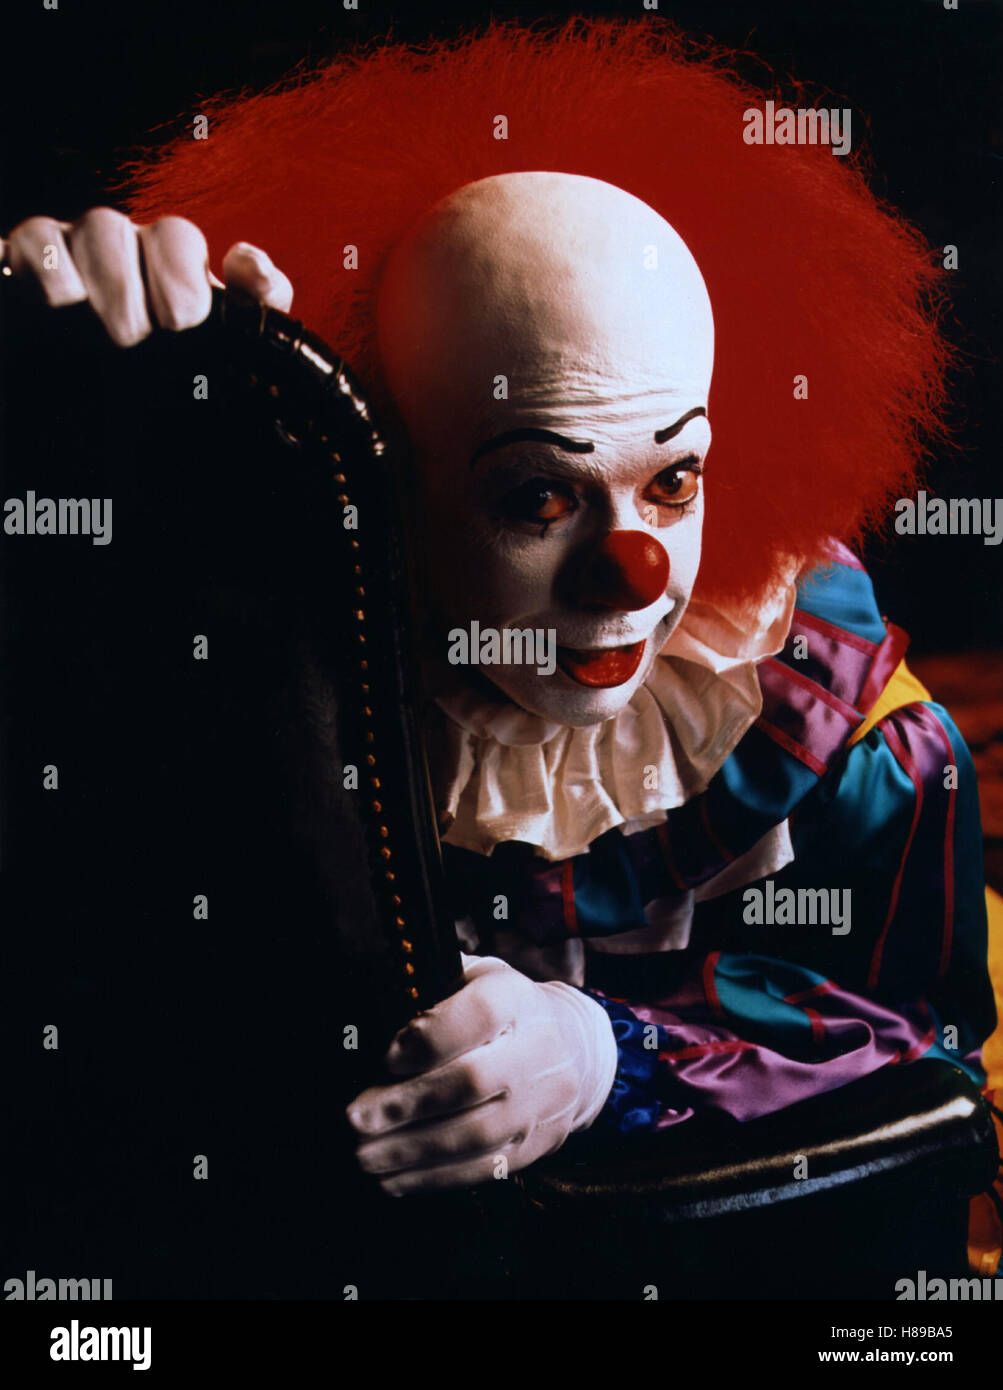 Stephen Kings 'ES', (STEPHEN KING'S 'IT') USA 1990, Regie: Tommy Lee Wallace, TIM CURRY, Stichwort: Clown Stock Photo